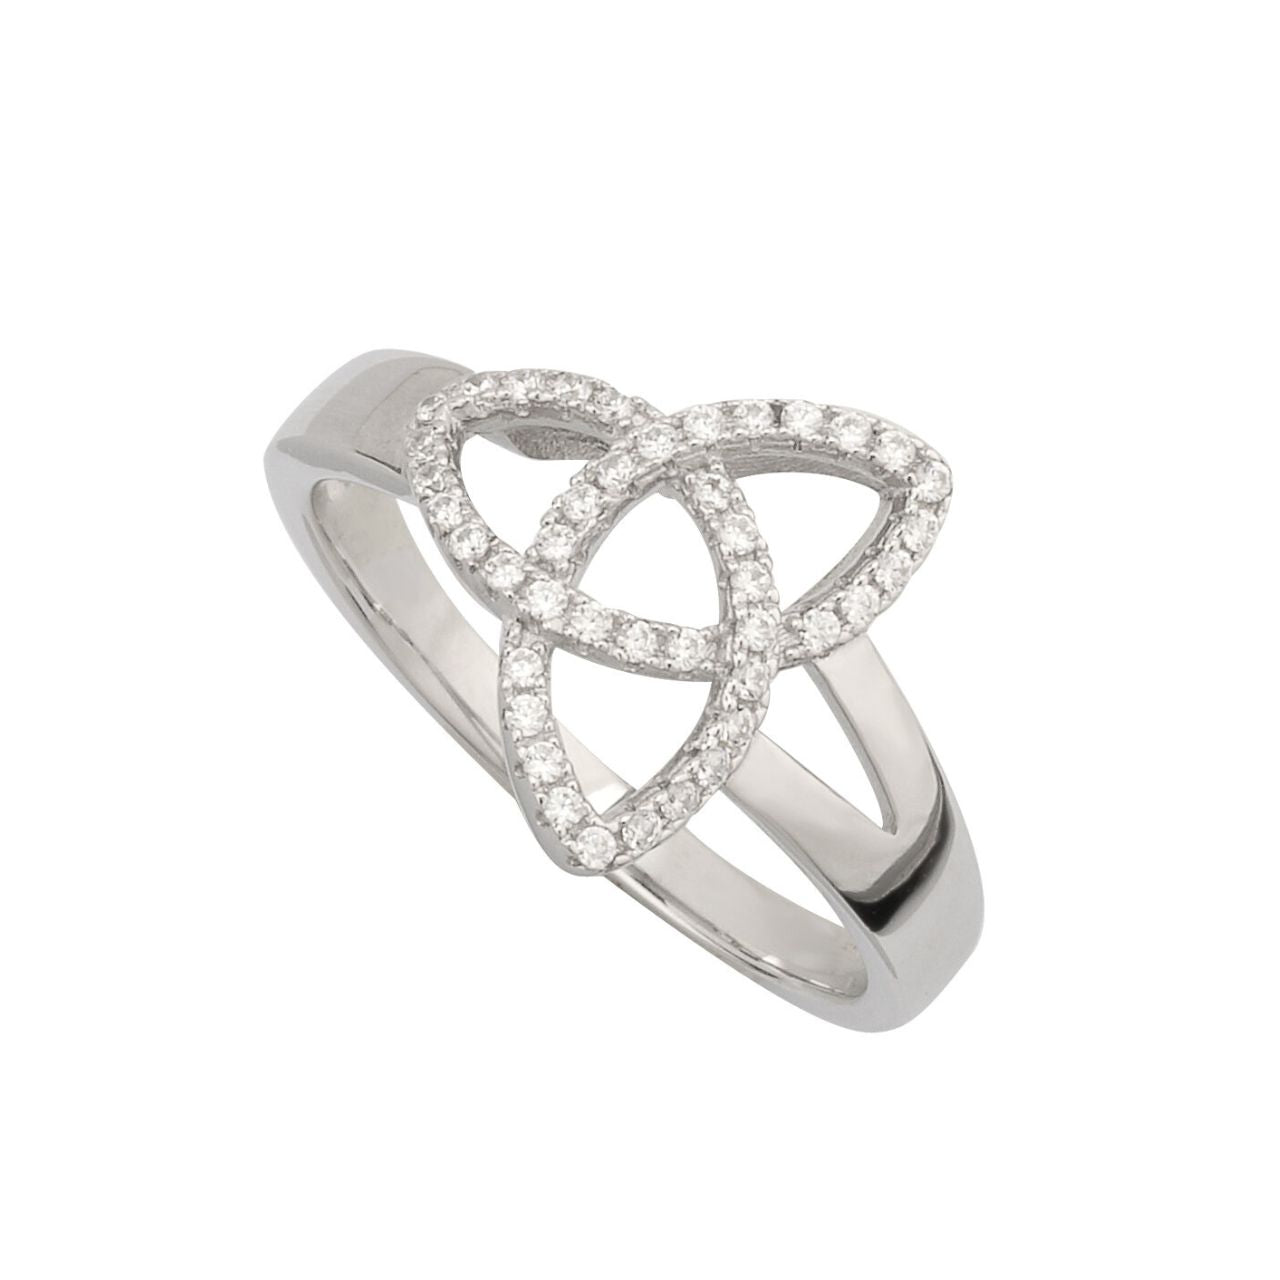 Solvar Silver Cubic Zirconia Trinity Knot Ring  This sterling silver ring with cubic zirconia makes a real statement, and would make a fabulous gift for a loved one. The Trinity Knot has no beginning and no end, symbolising eternal life and everlasting love. It has been Irish hallmarked in Dublin Castle.